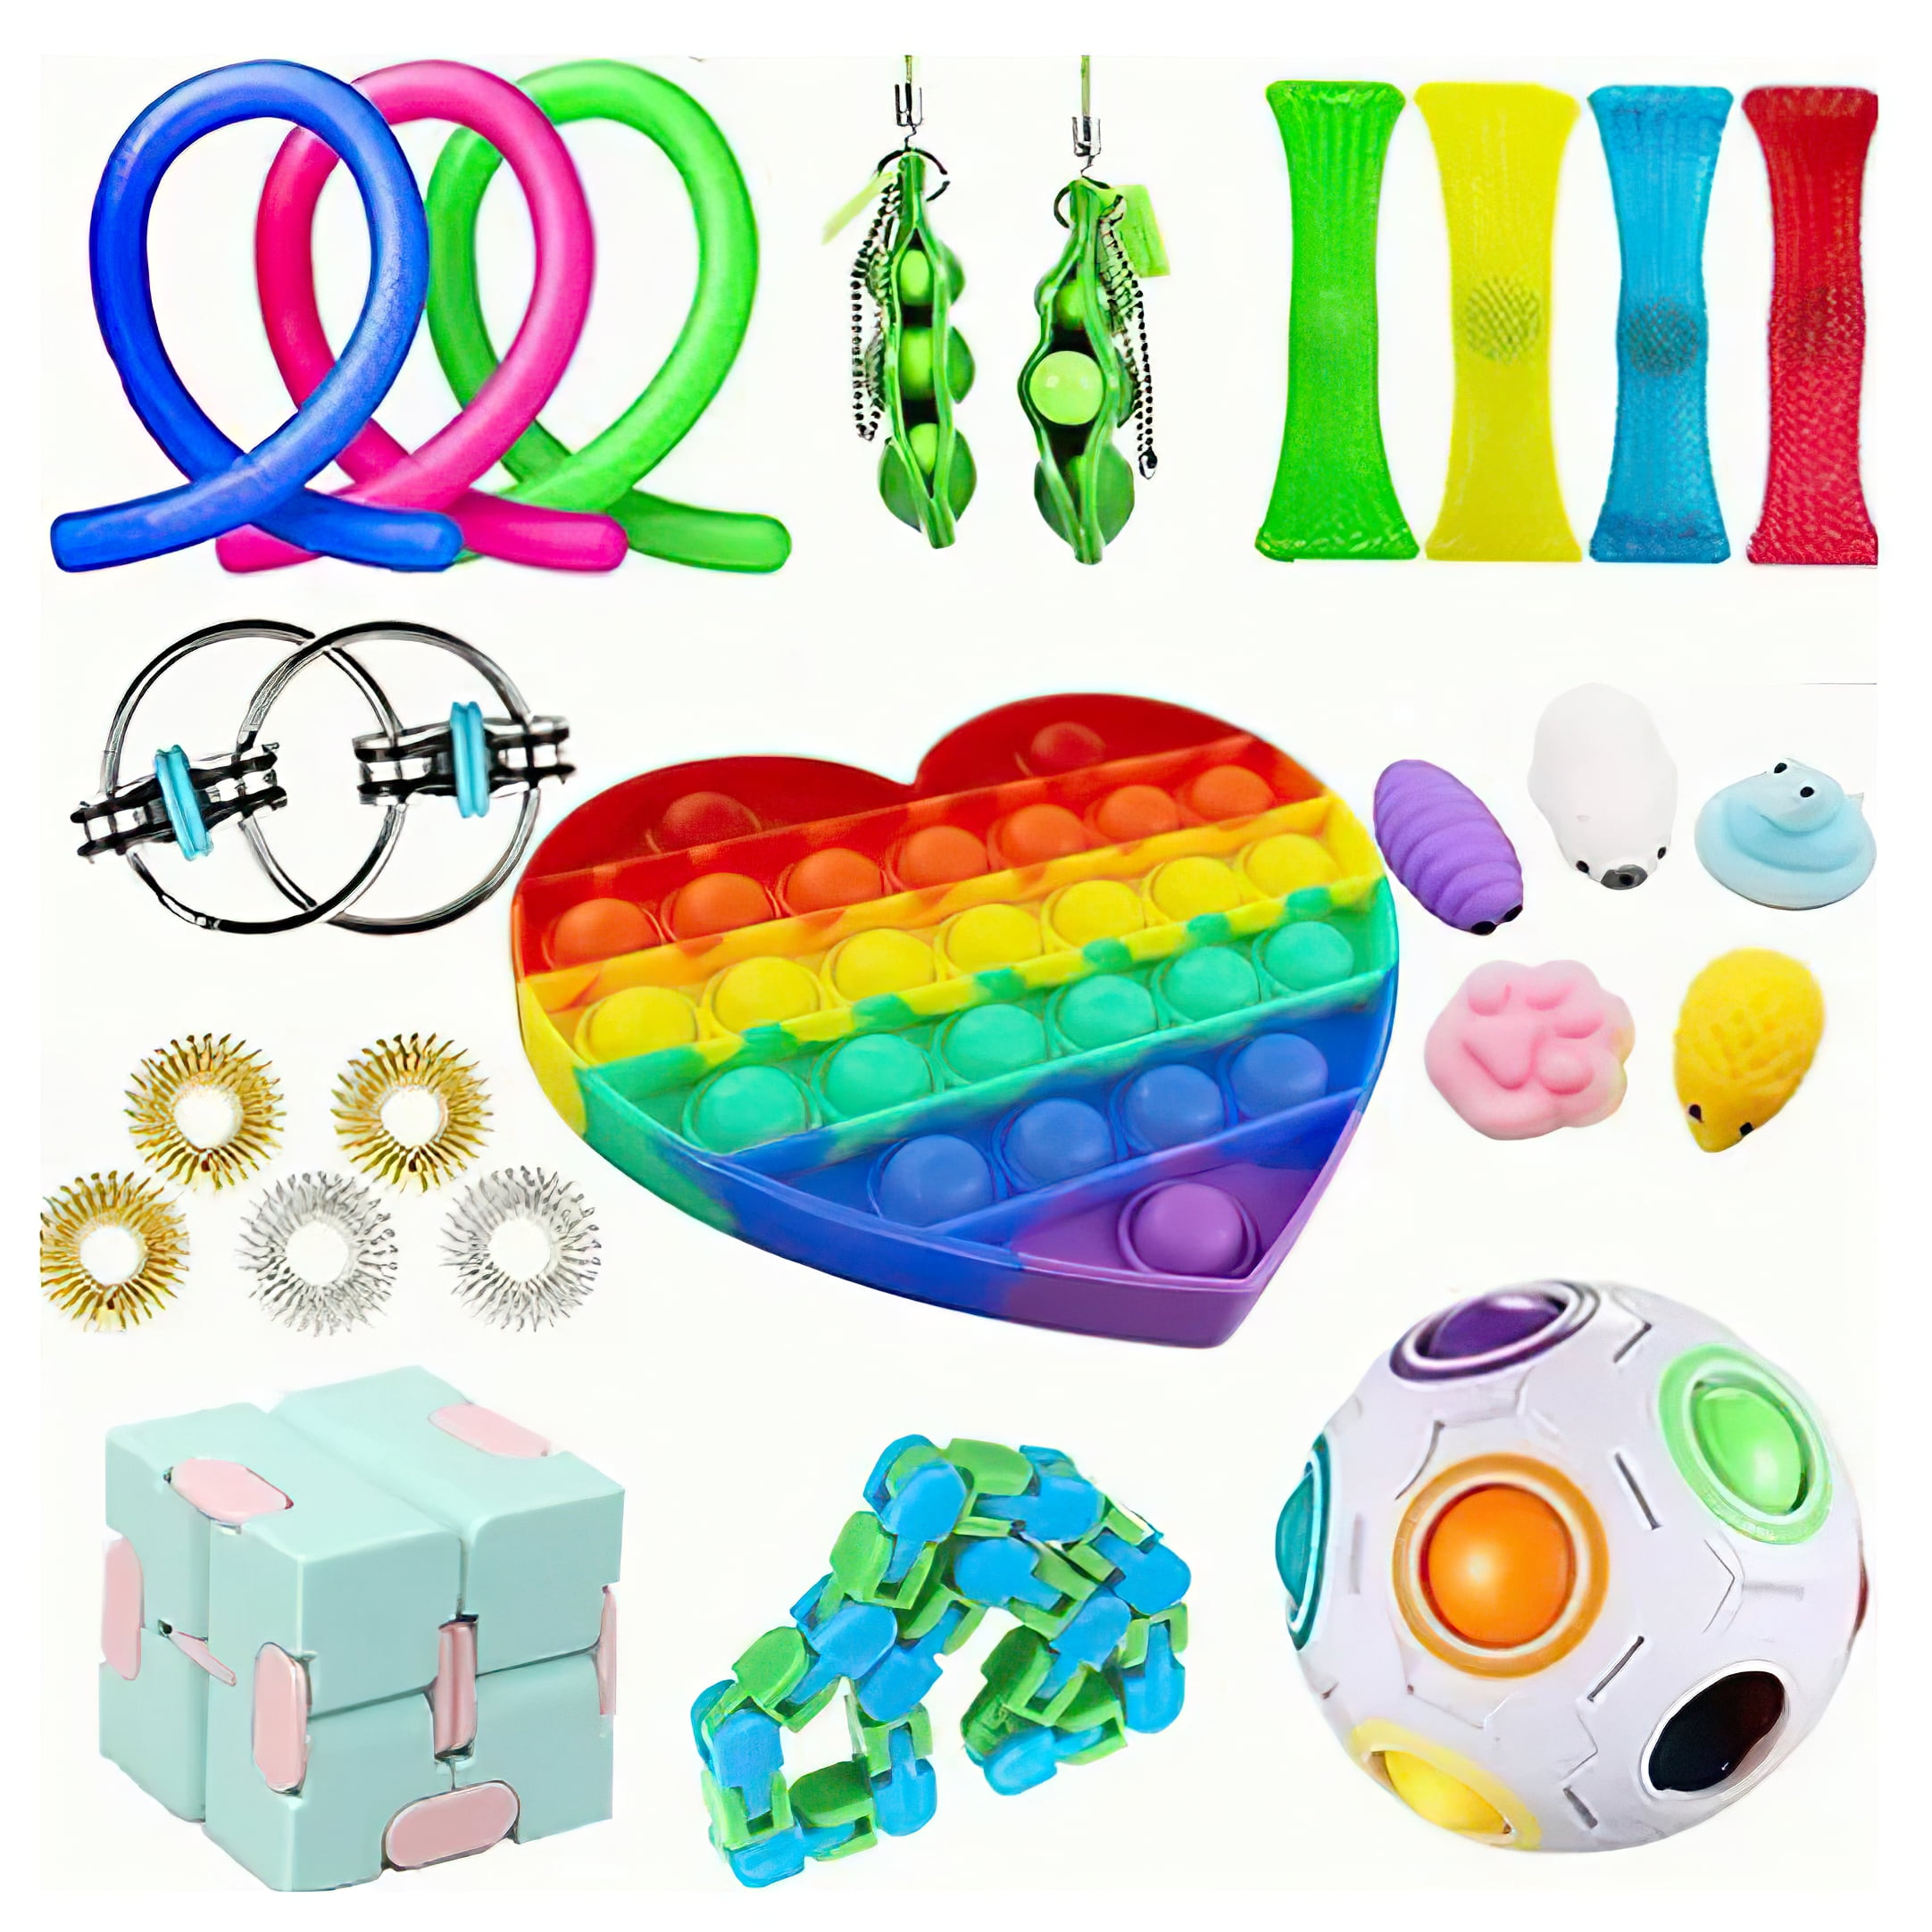 Anti-Stress Face Reliever Egg Balls Autism Mood Squeeze Relief Anxiety ADHD Toys 